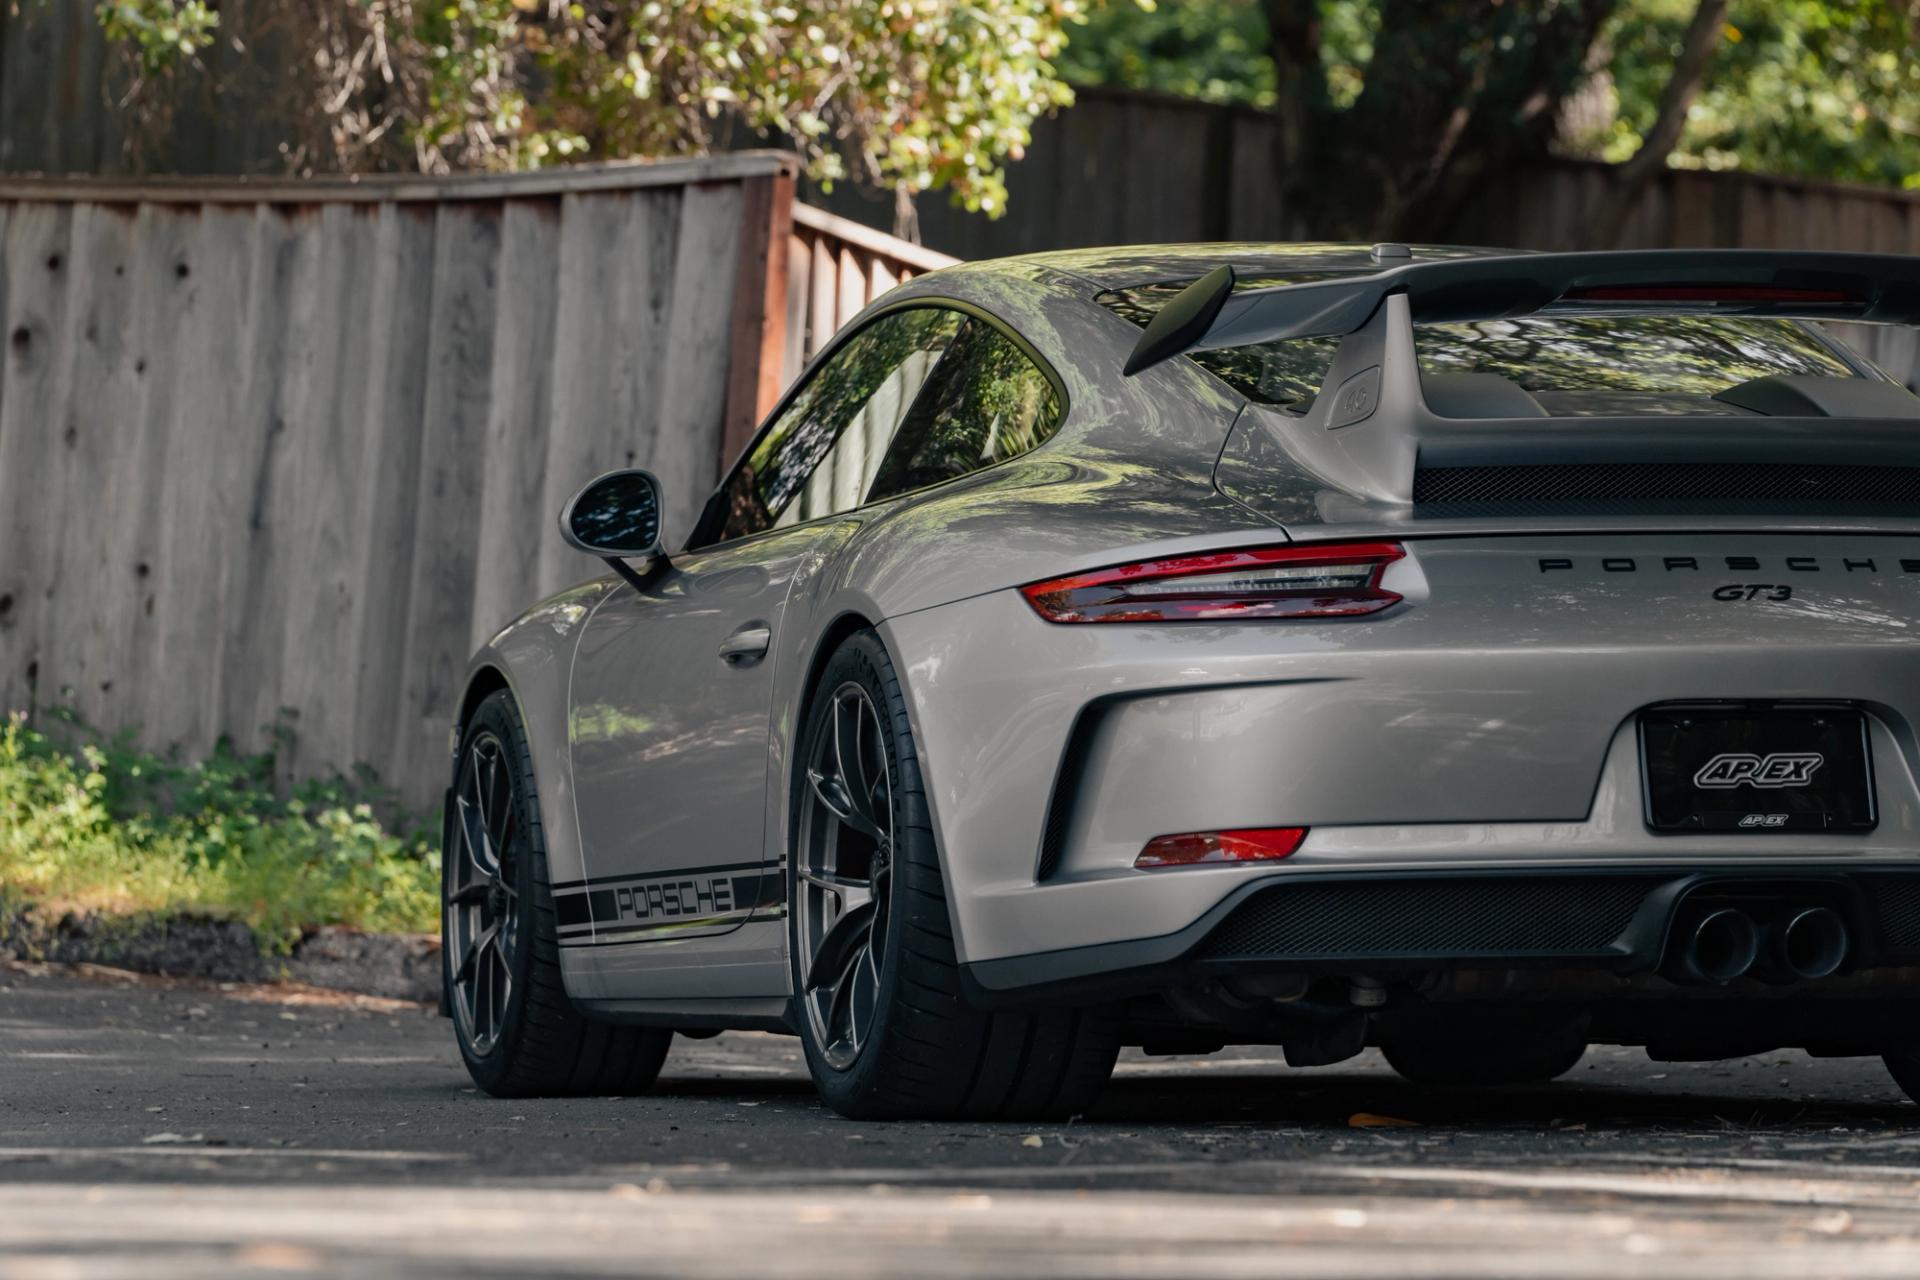 Porsche 911 991.2 GT3 with 19" VS-5RS in Anthracite